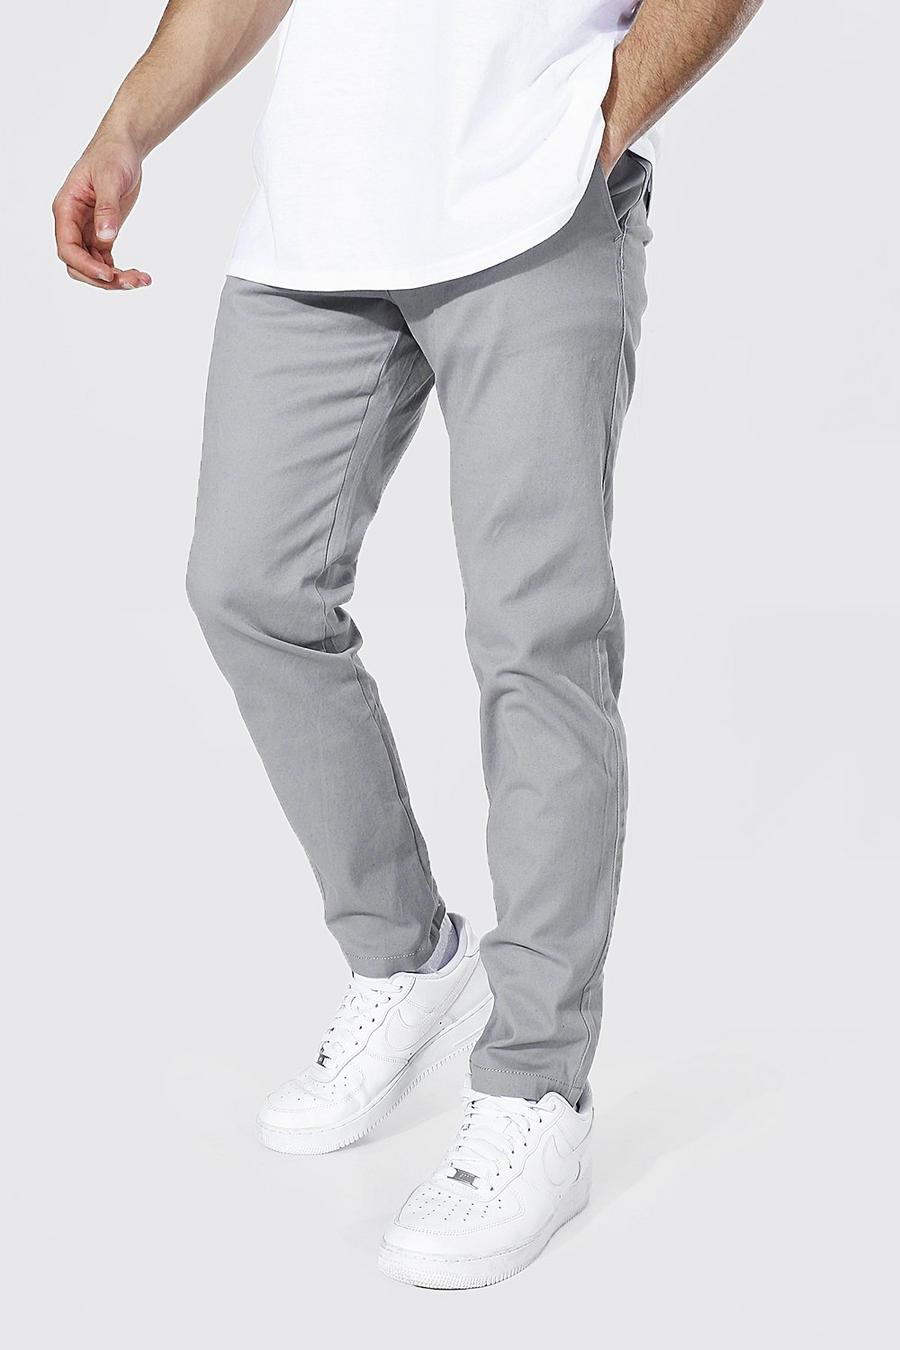 for Men Grey Slacks and Chinos Casual trousers and trousers Mens Clothing Trousers Daily Paper Synthetic Pants in Steel Grey 